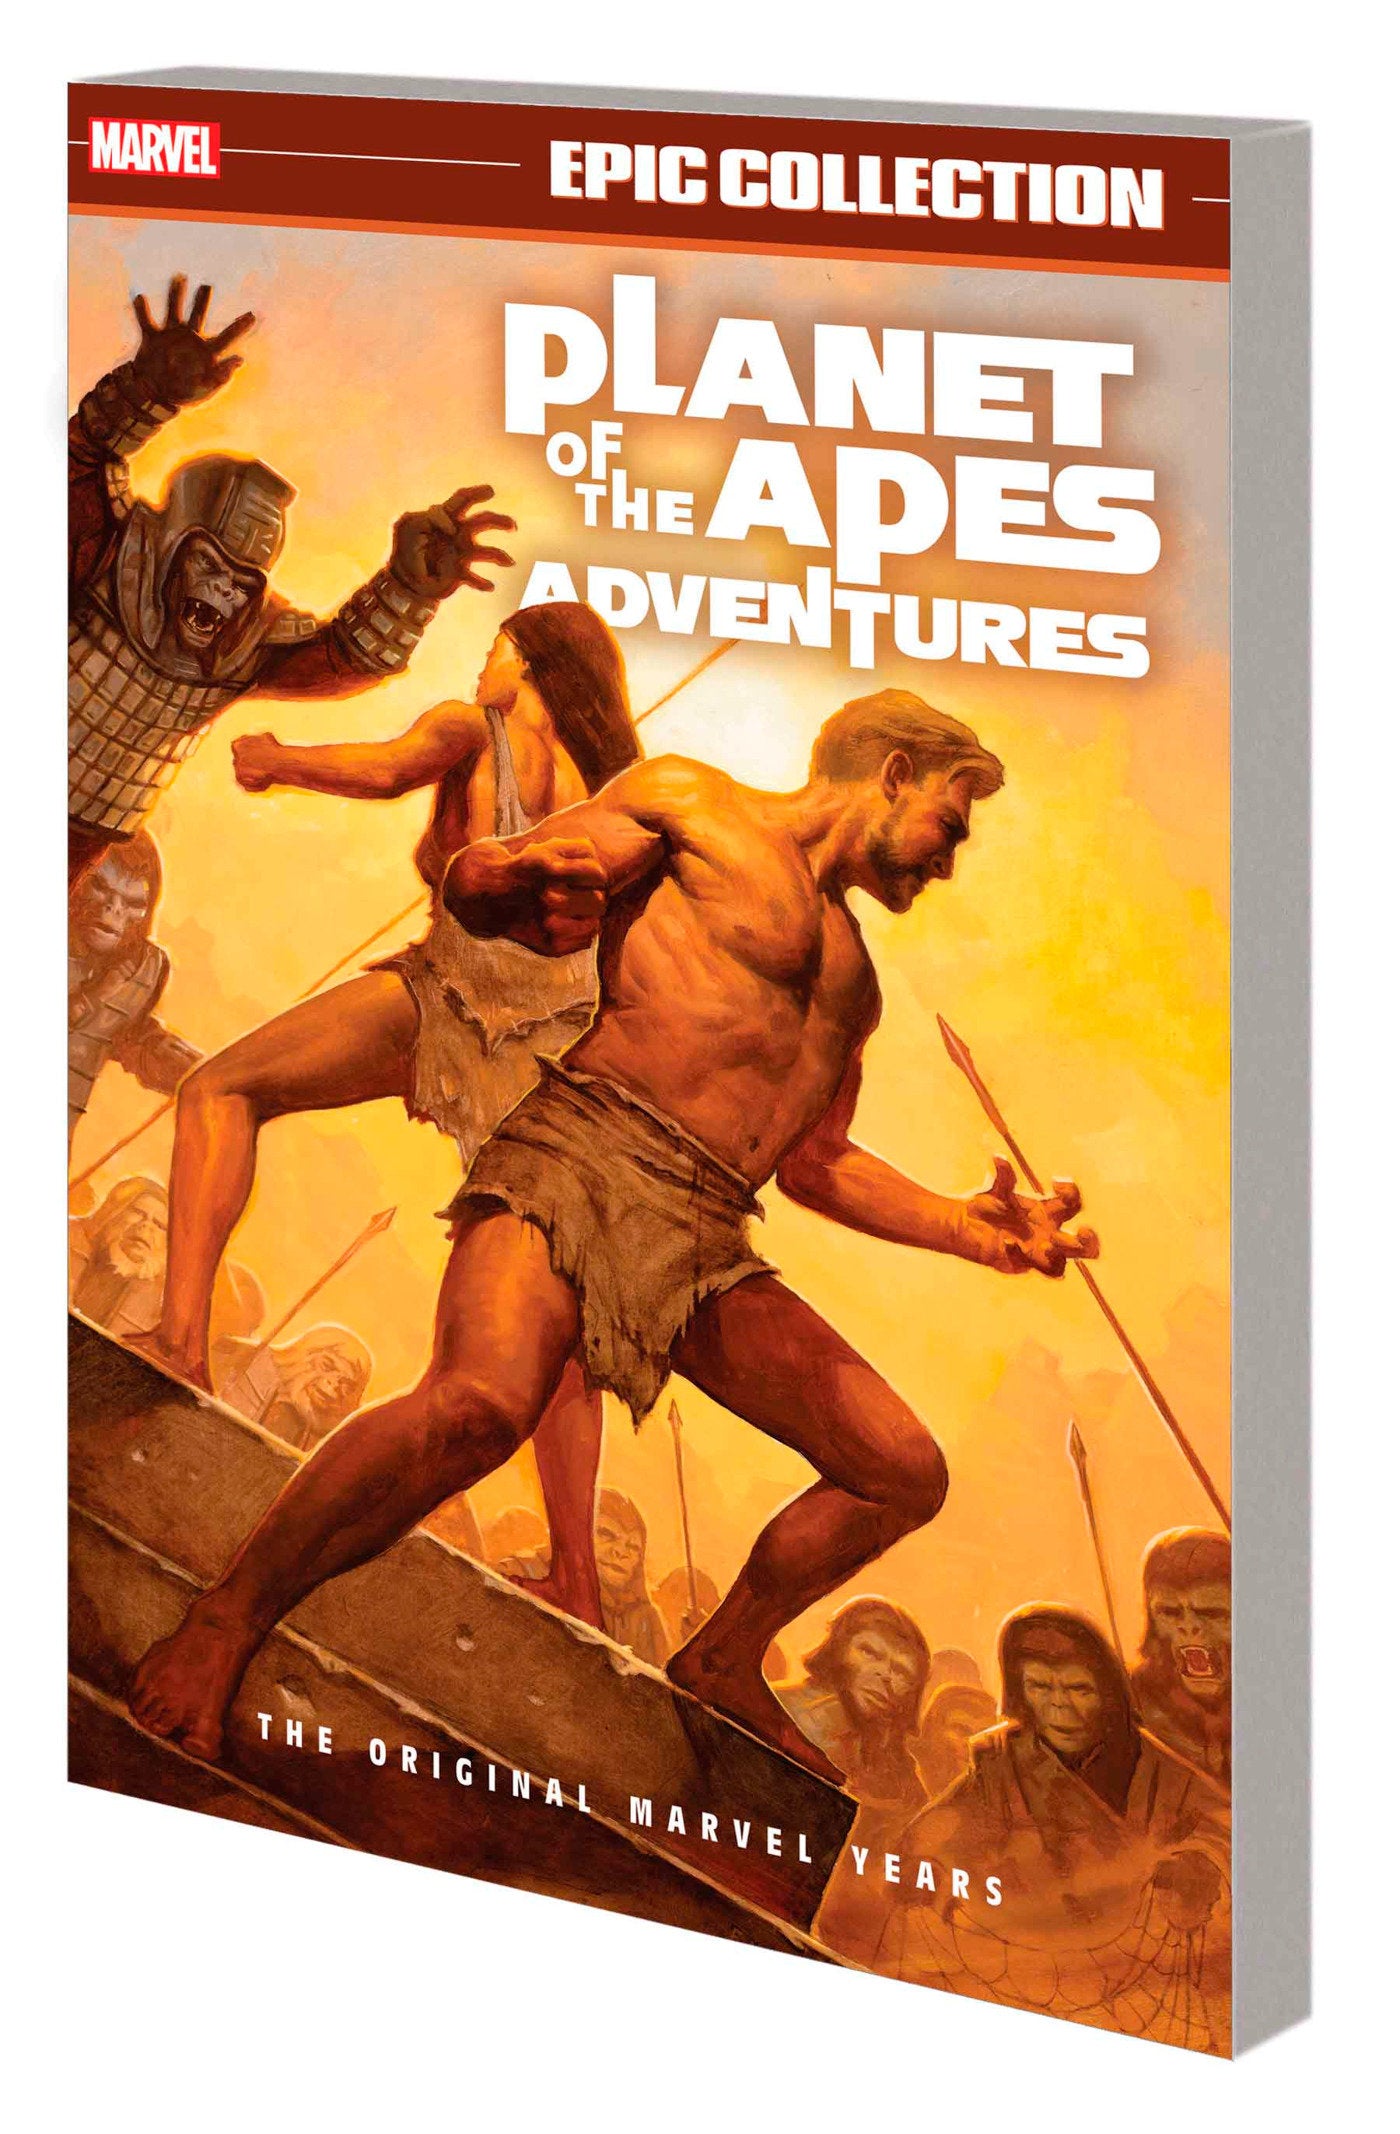 PLANET OF THE APES ADVENTURES EPIC COLLECTION: THE ORIGINAL MARVEL YEARS - Release Date:  5/14/24